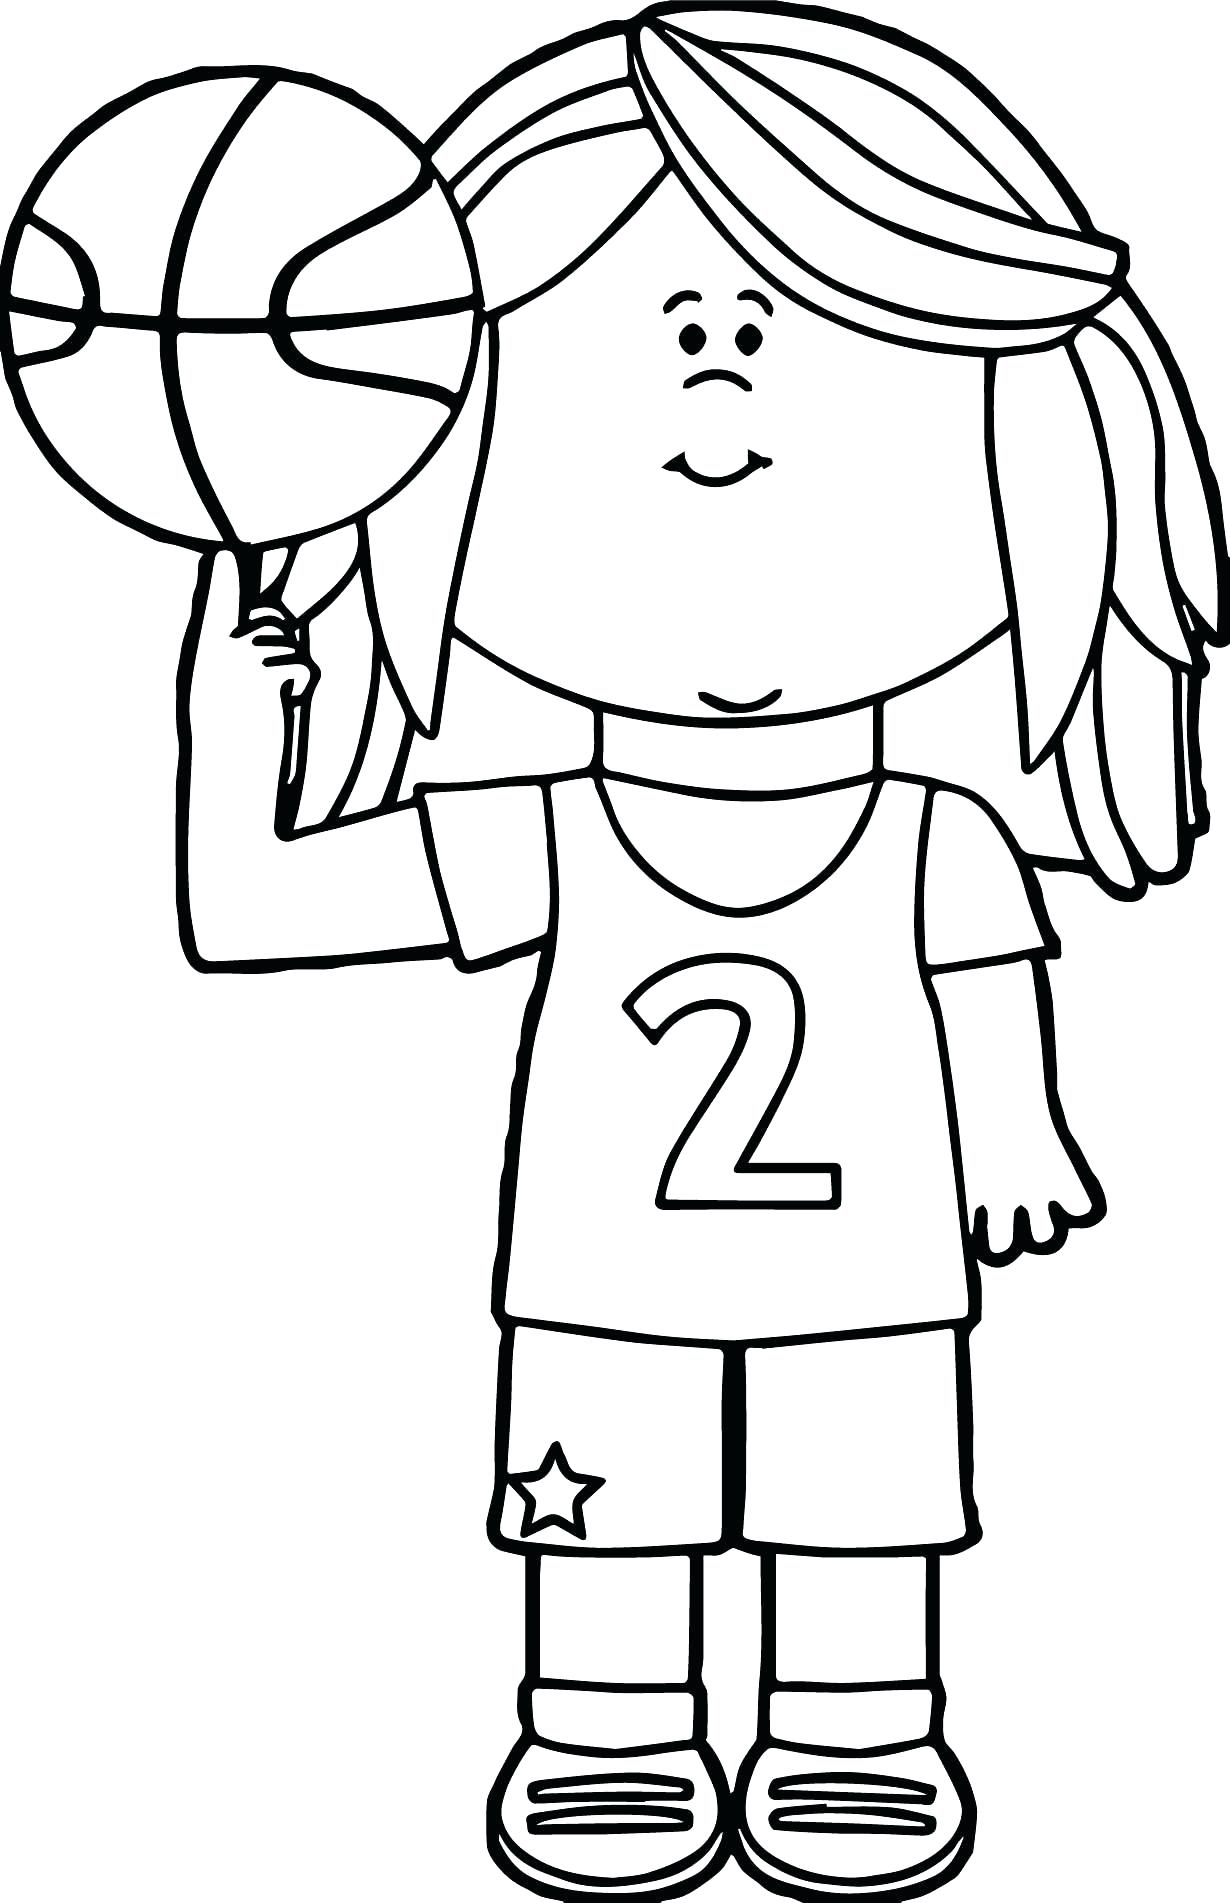 Basketball Coloring Pages Printable at GetColorings.com ...